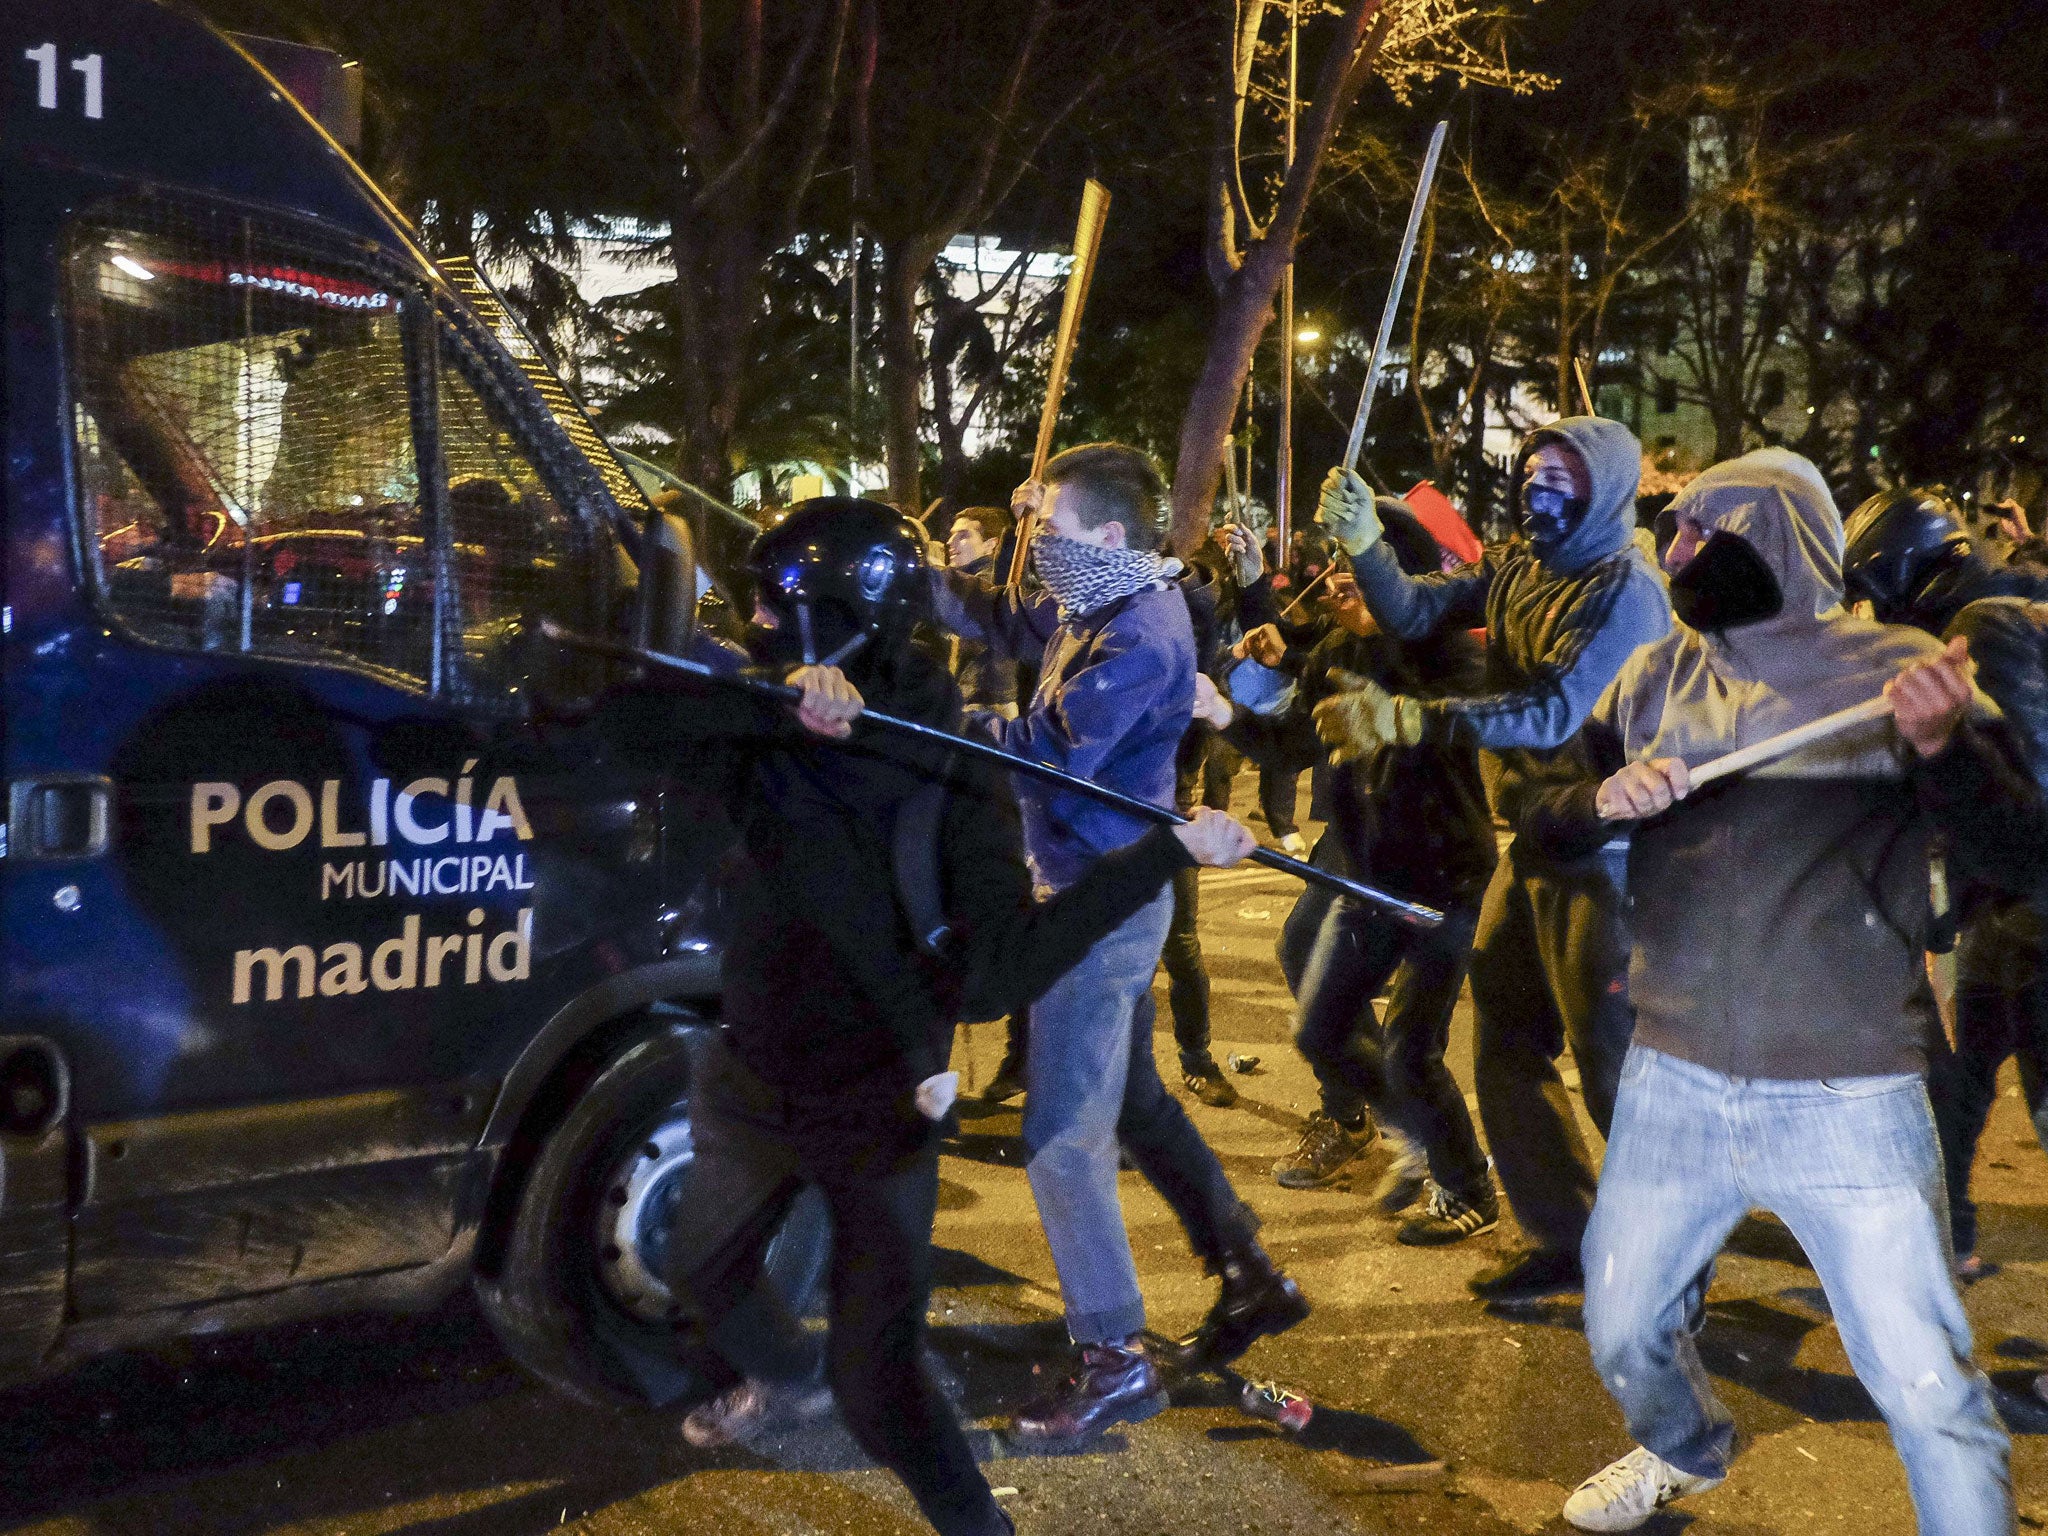 Rioters were stopped from reaching the headquarters of Spain’s ruling party